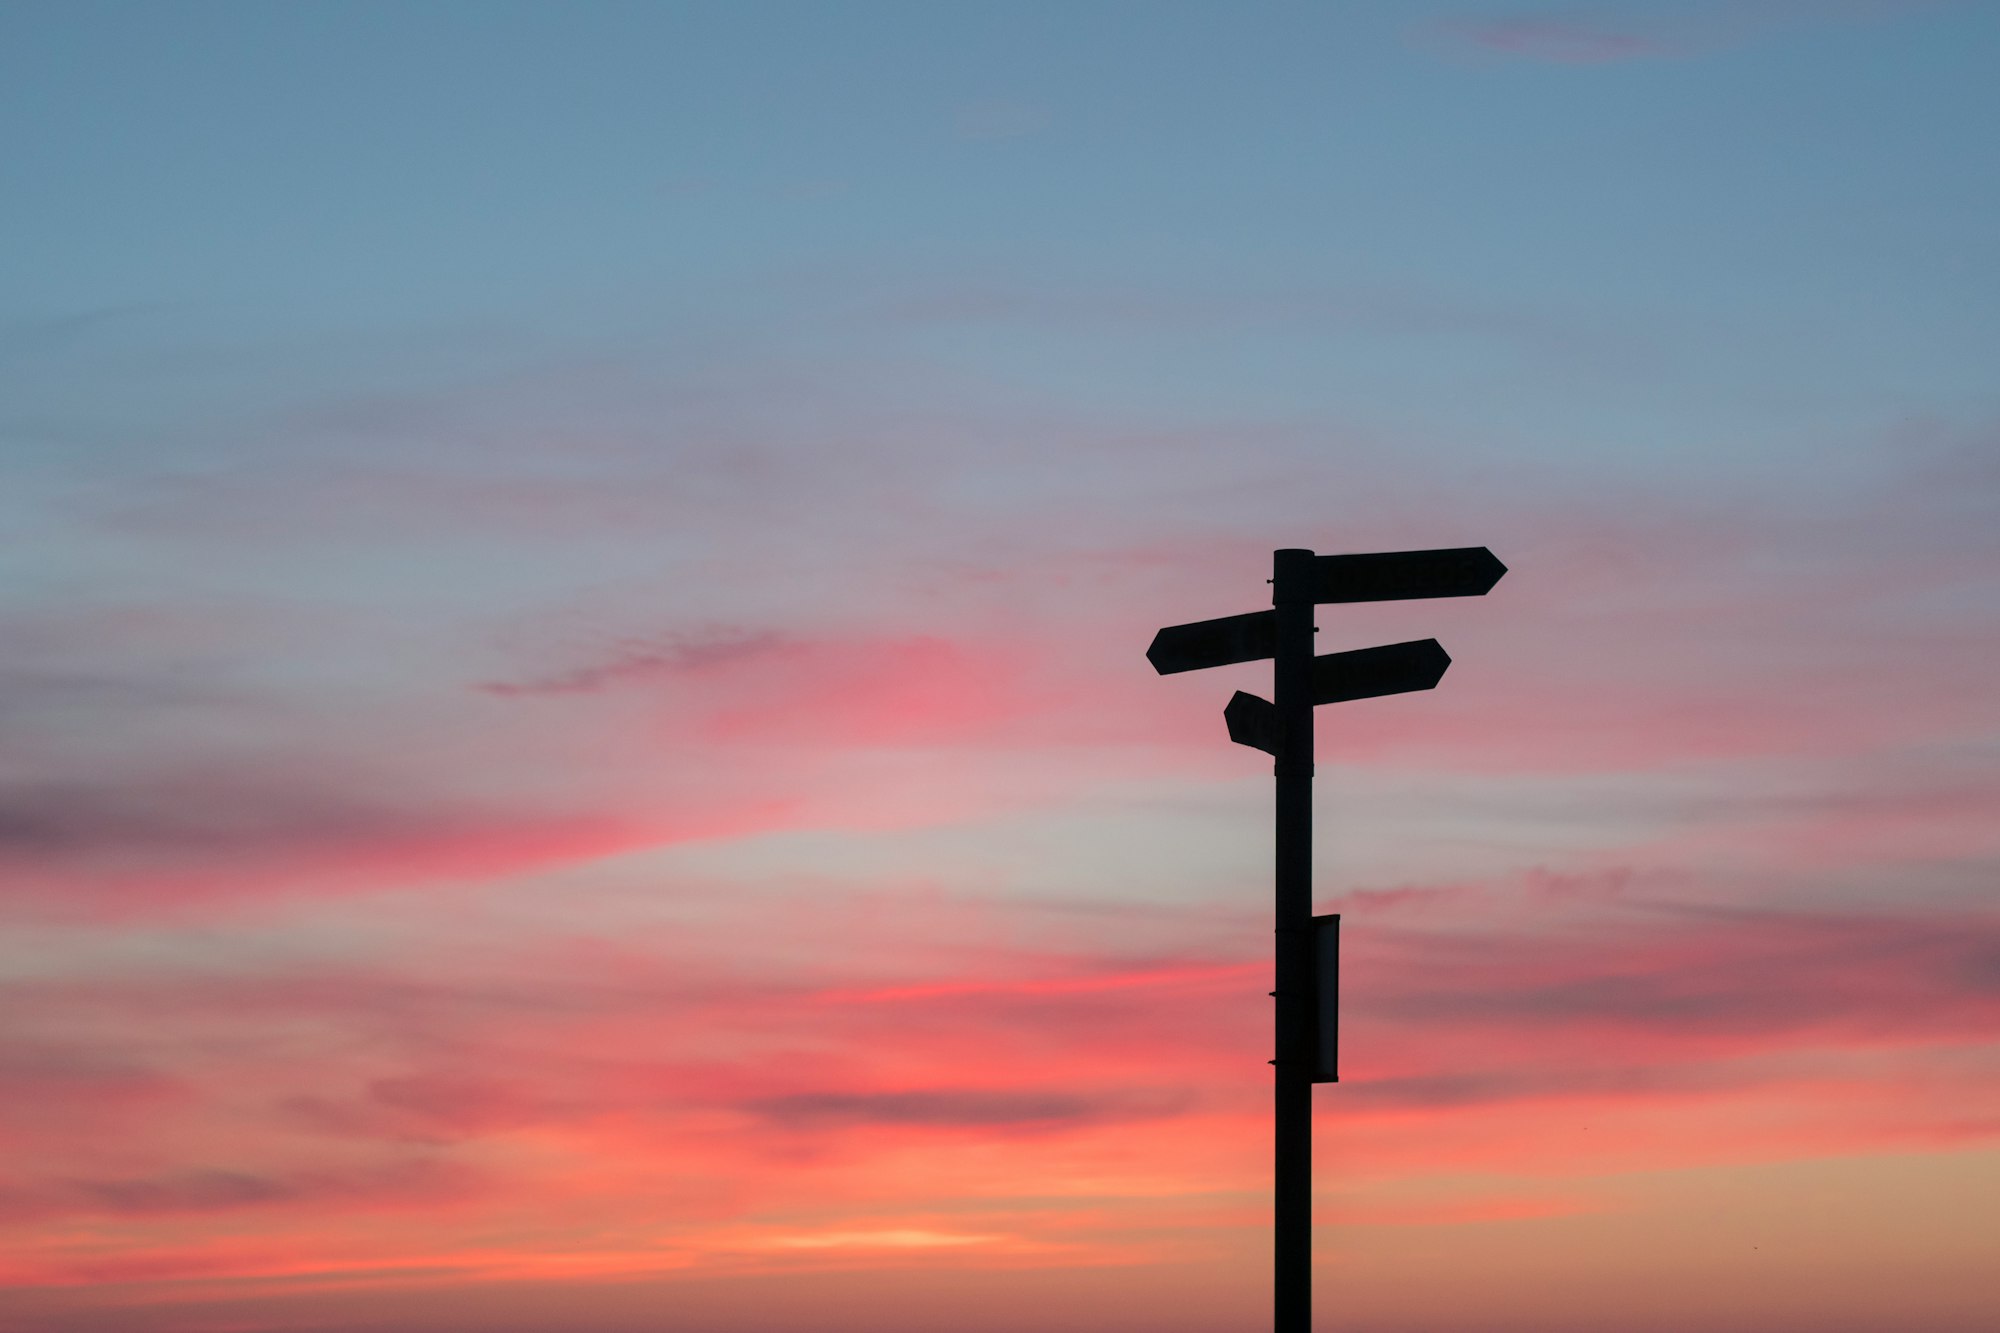 Silhouette of a signpost pointing in many directions, with the sky in sunset colours in the background